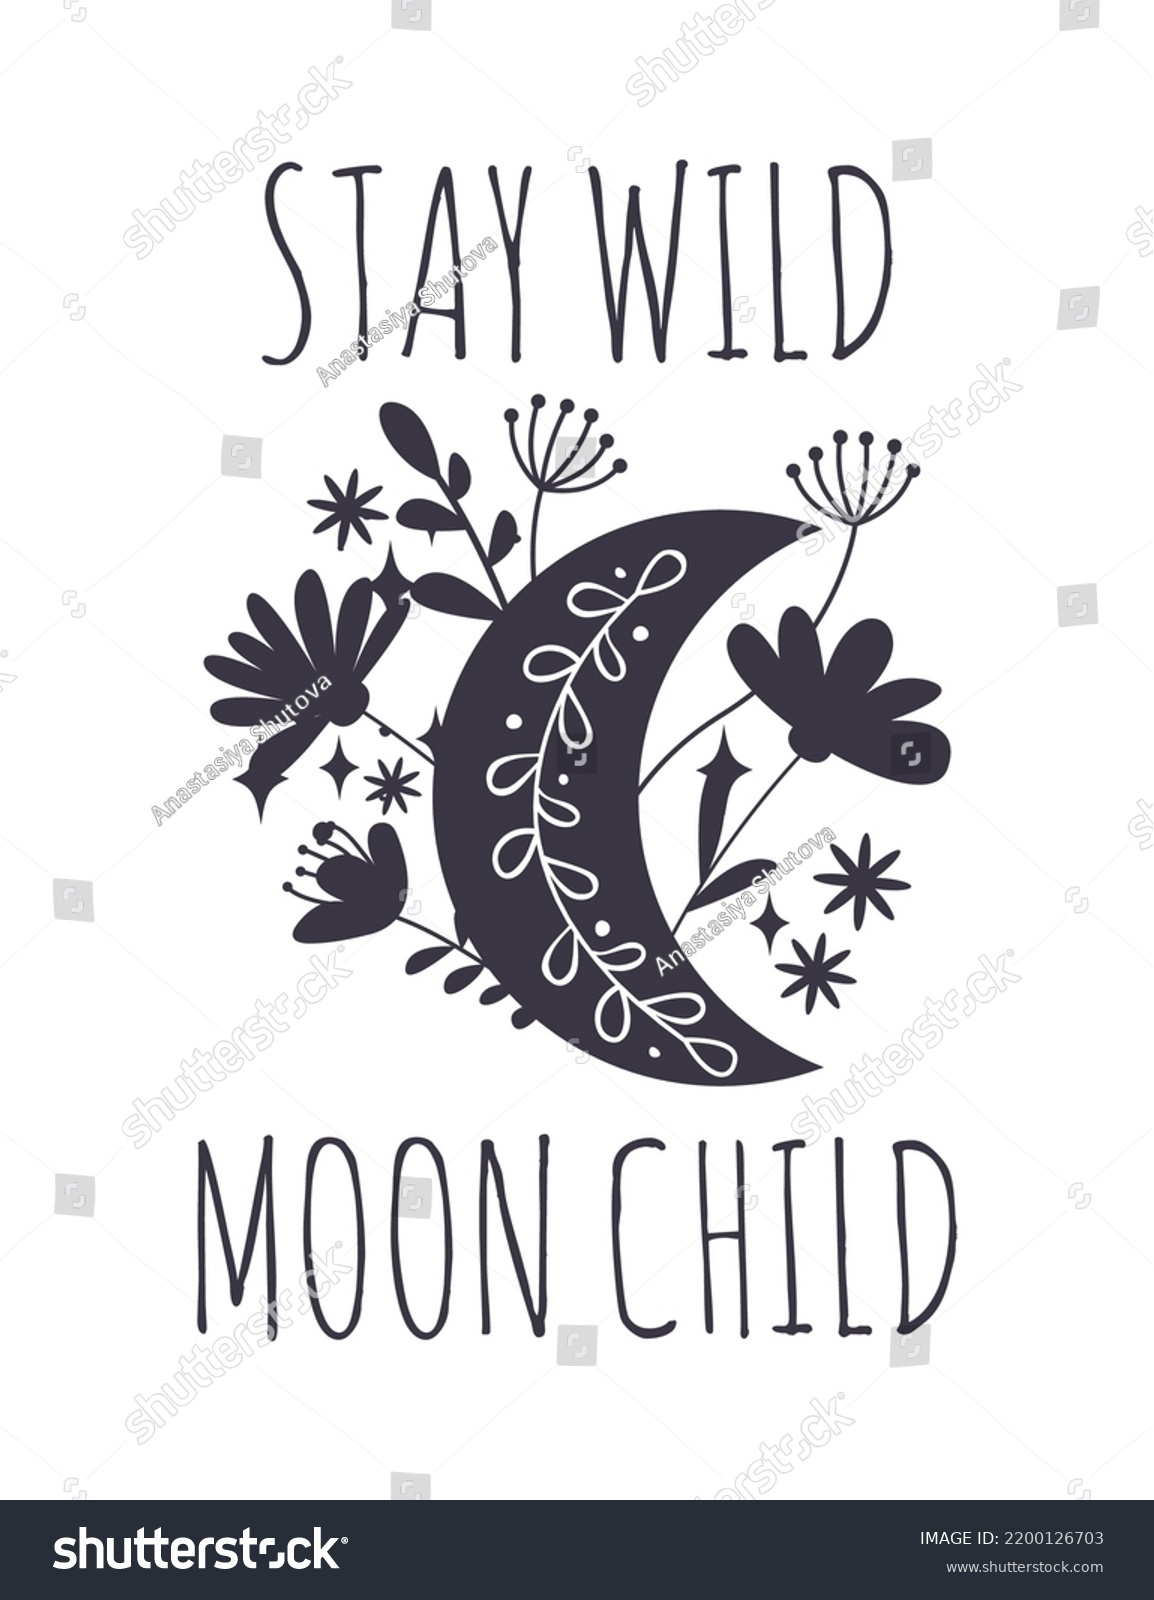 SVG of Stay wild Moon child vector with floral crescent moon. Celestial Svg cut file. Boho shirt design. Crescent moon with wildflowers vector illustration isolated on white background. Inspirational quote svg